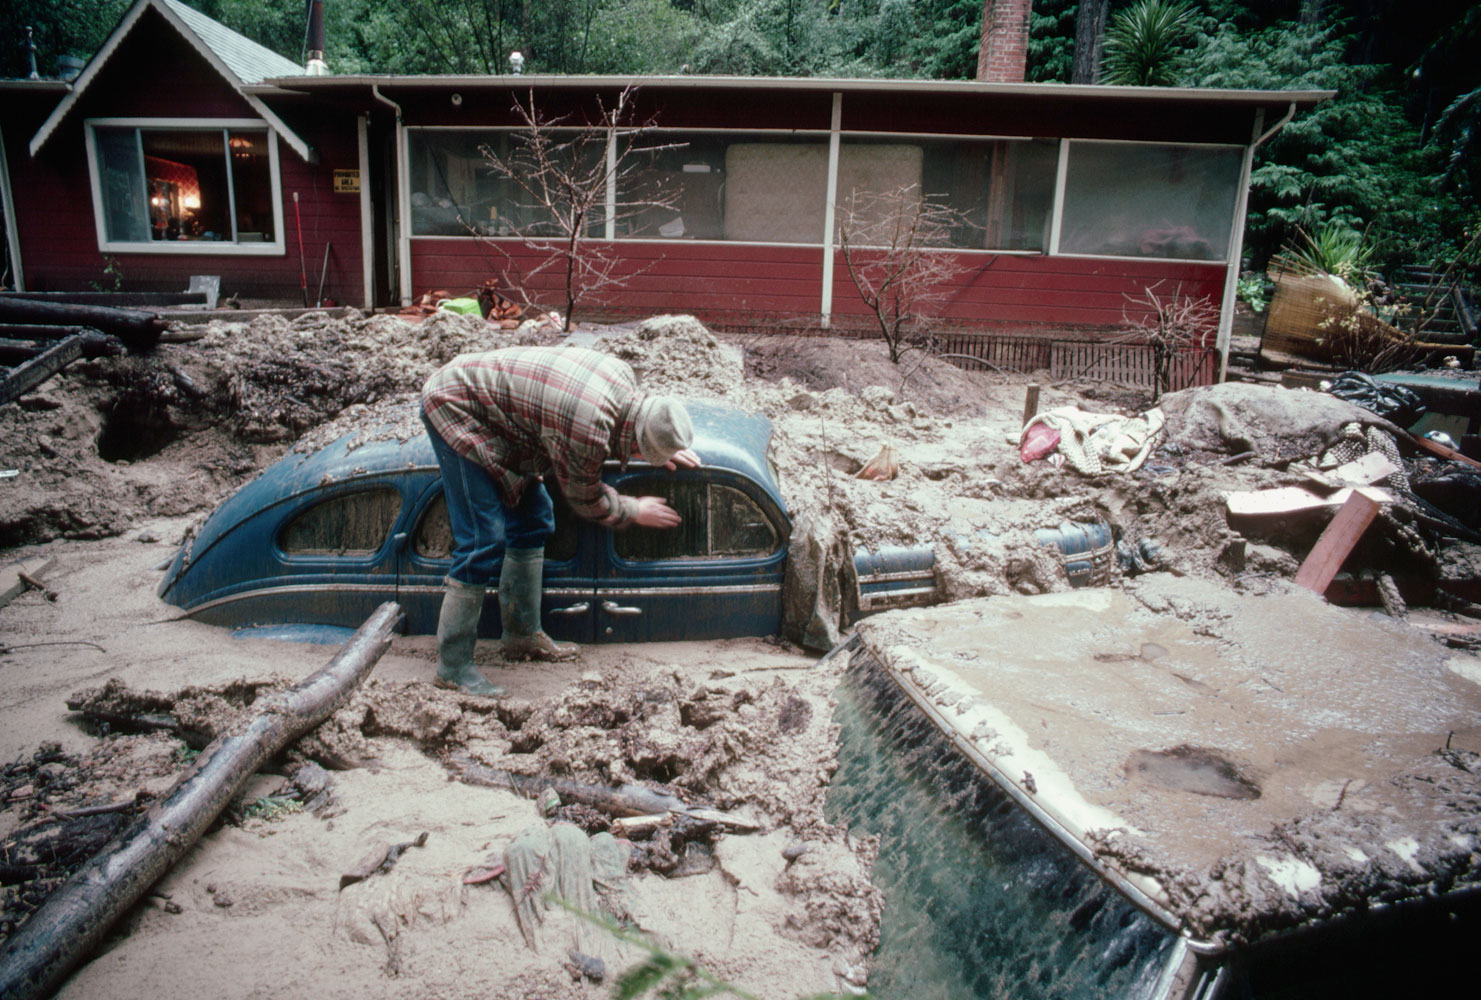 A man attempts to excavate an old car buried by a mudslide, most likely triggered by El Nino-induced rains on January 1, 1981.